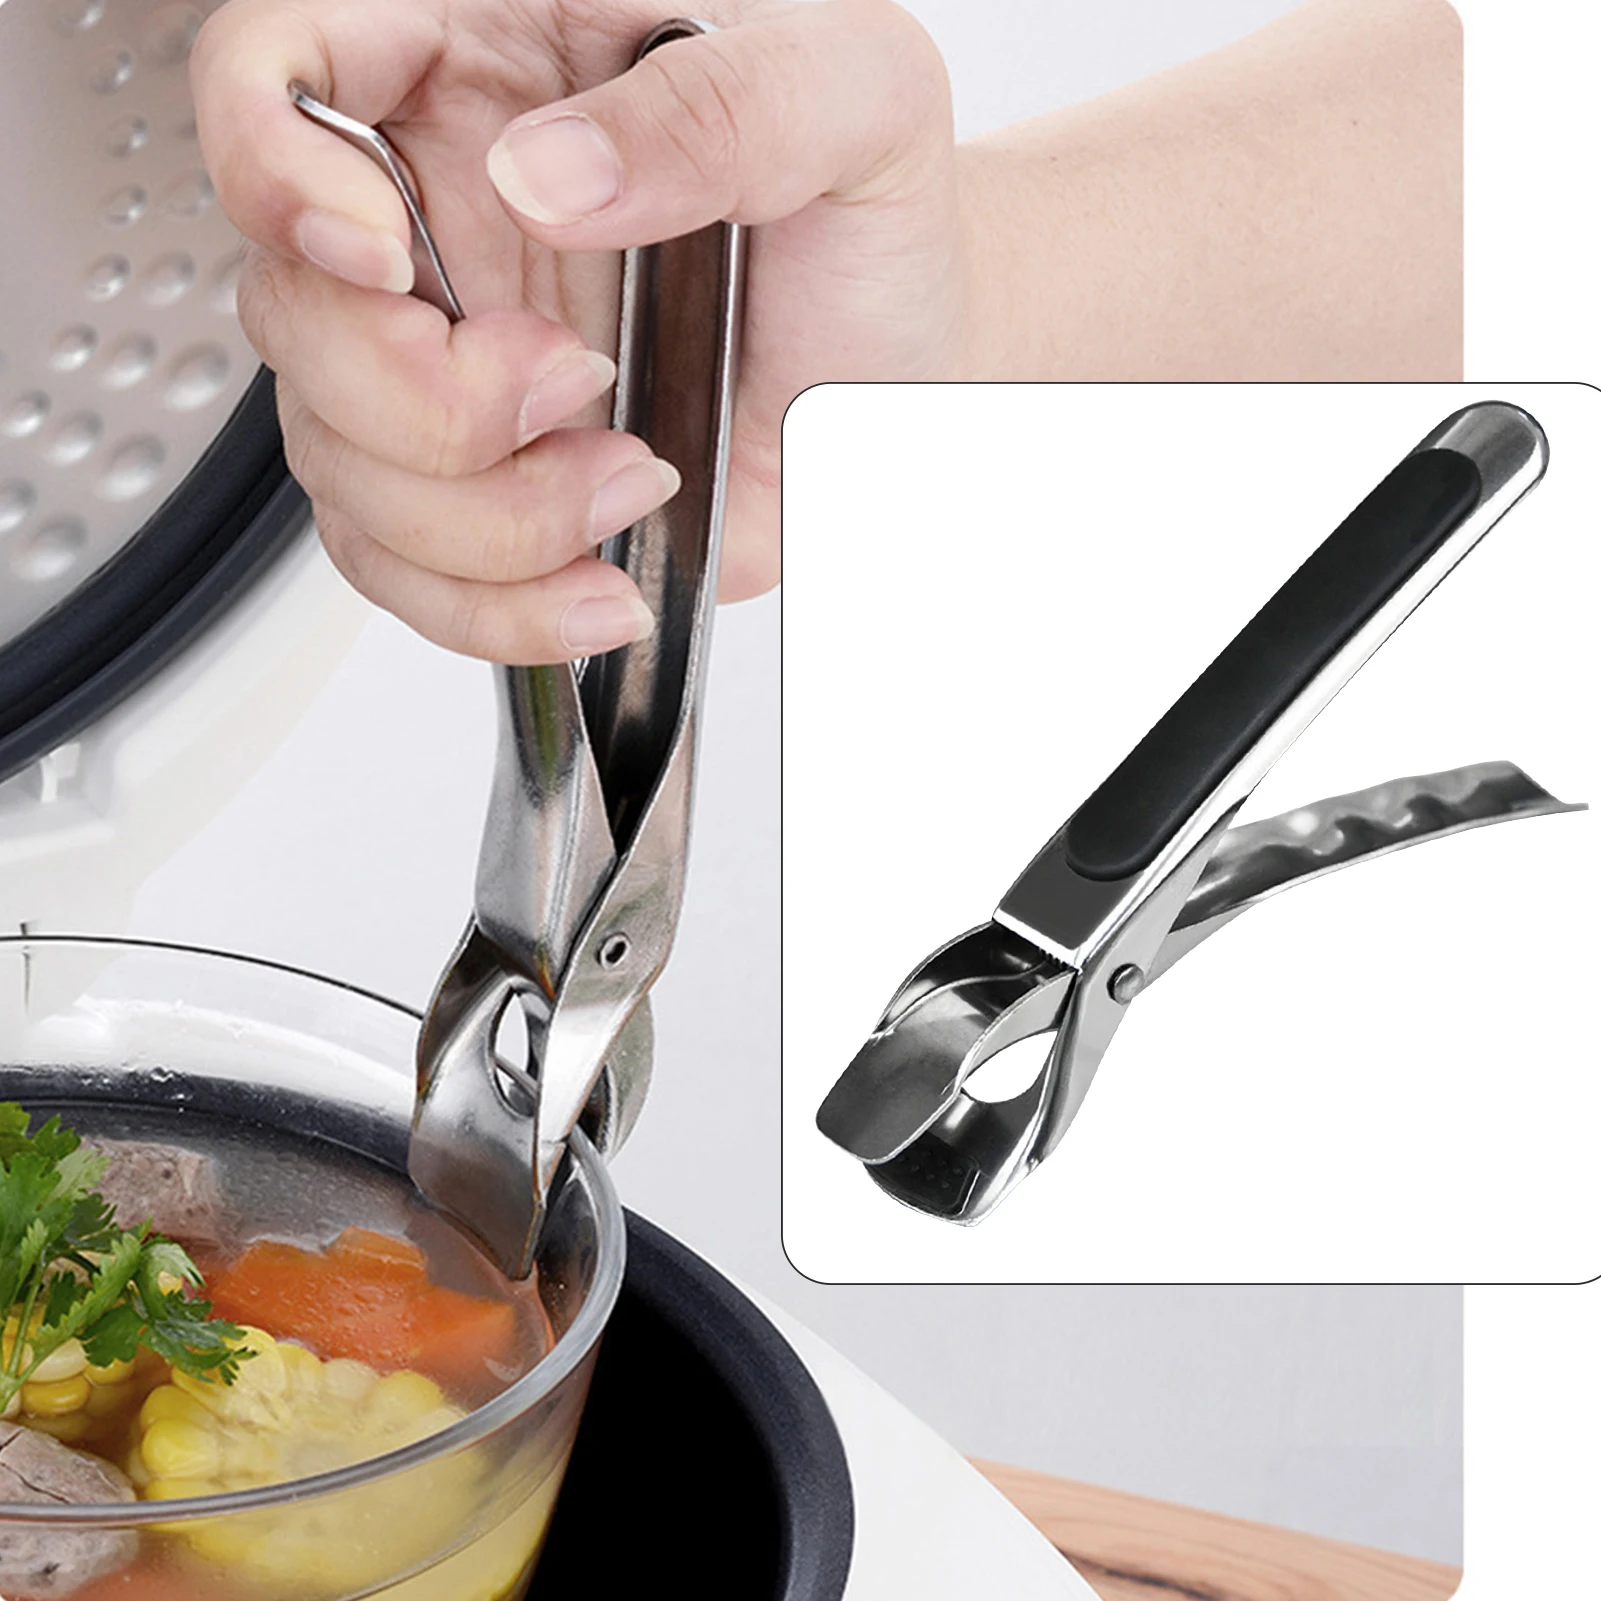 Details about   Bowl Clip Pot Gripper Hot Plate Pan Stainless Steel Dish Clamp Kitchen Holder US 